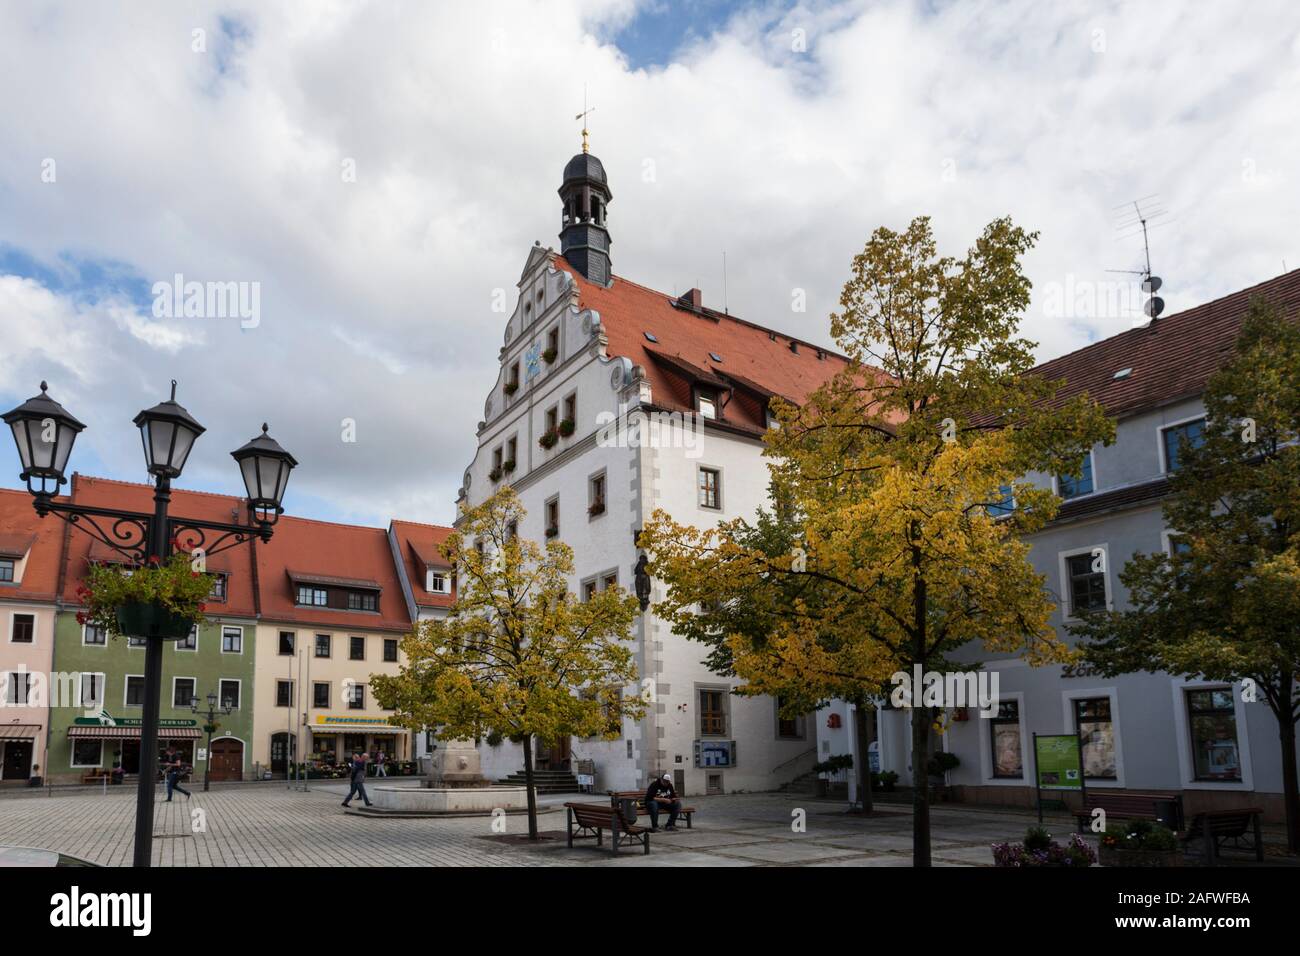 Page 3 - Dippoldiswalde High Resolution Stock Photography and Images - Alamy